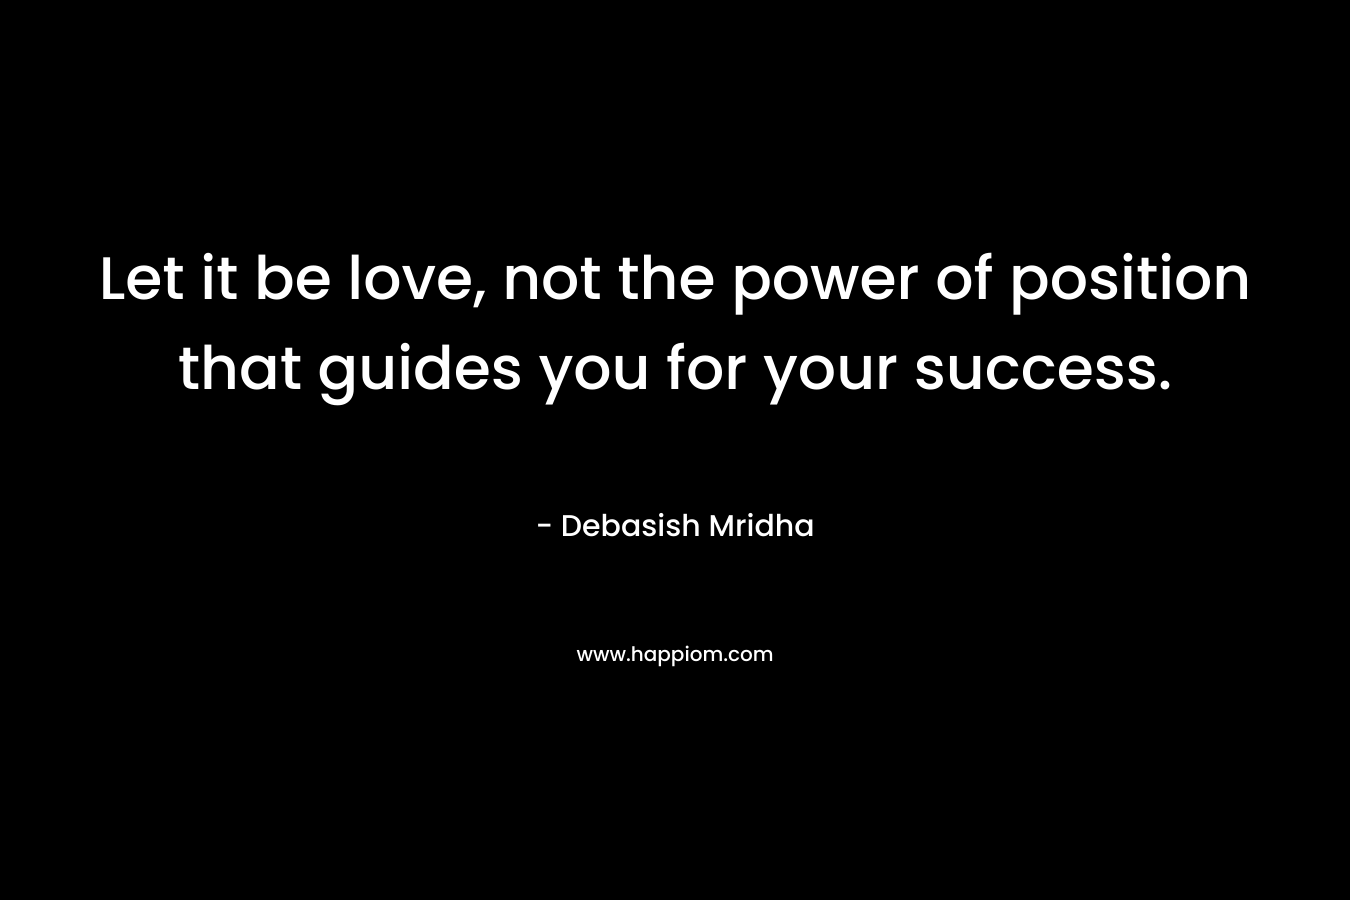 Let it be love, not the power of position that guides you for your success.